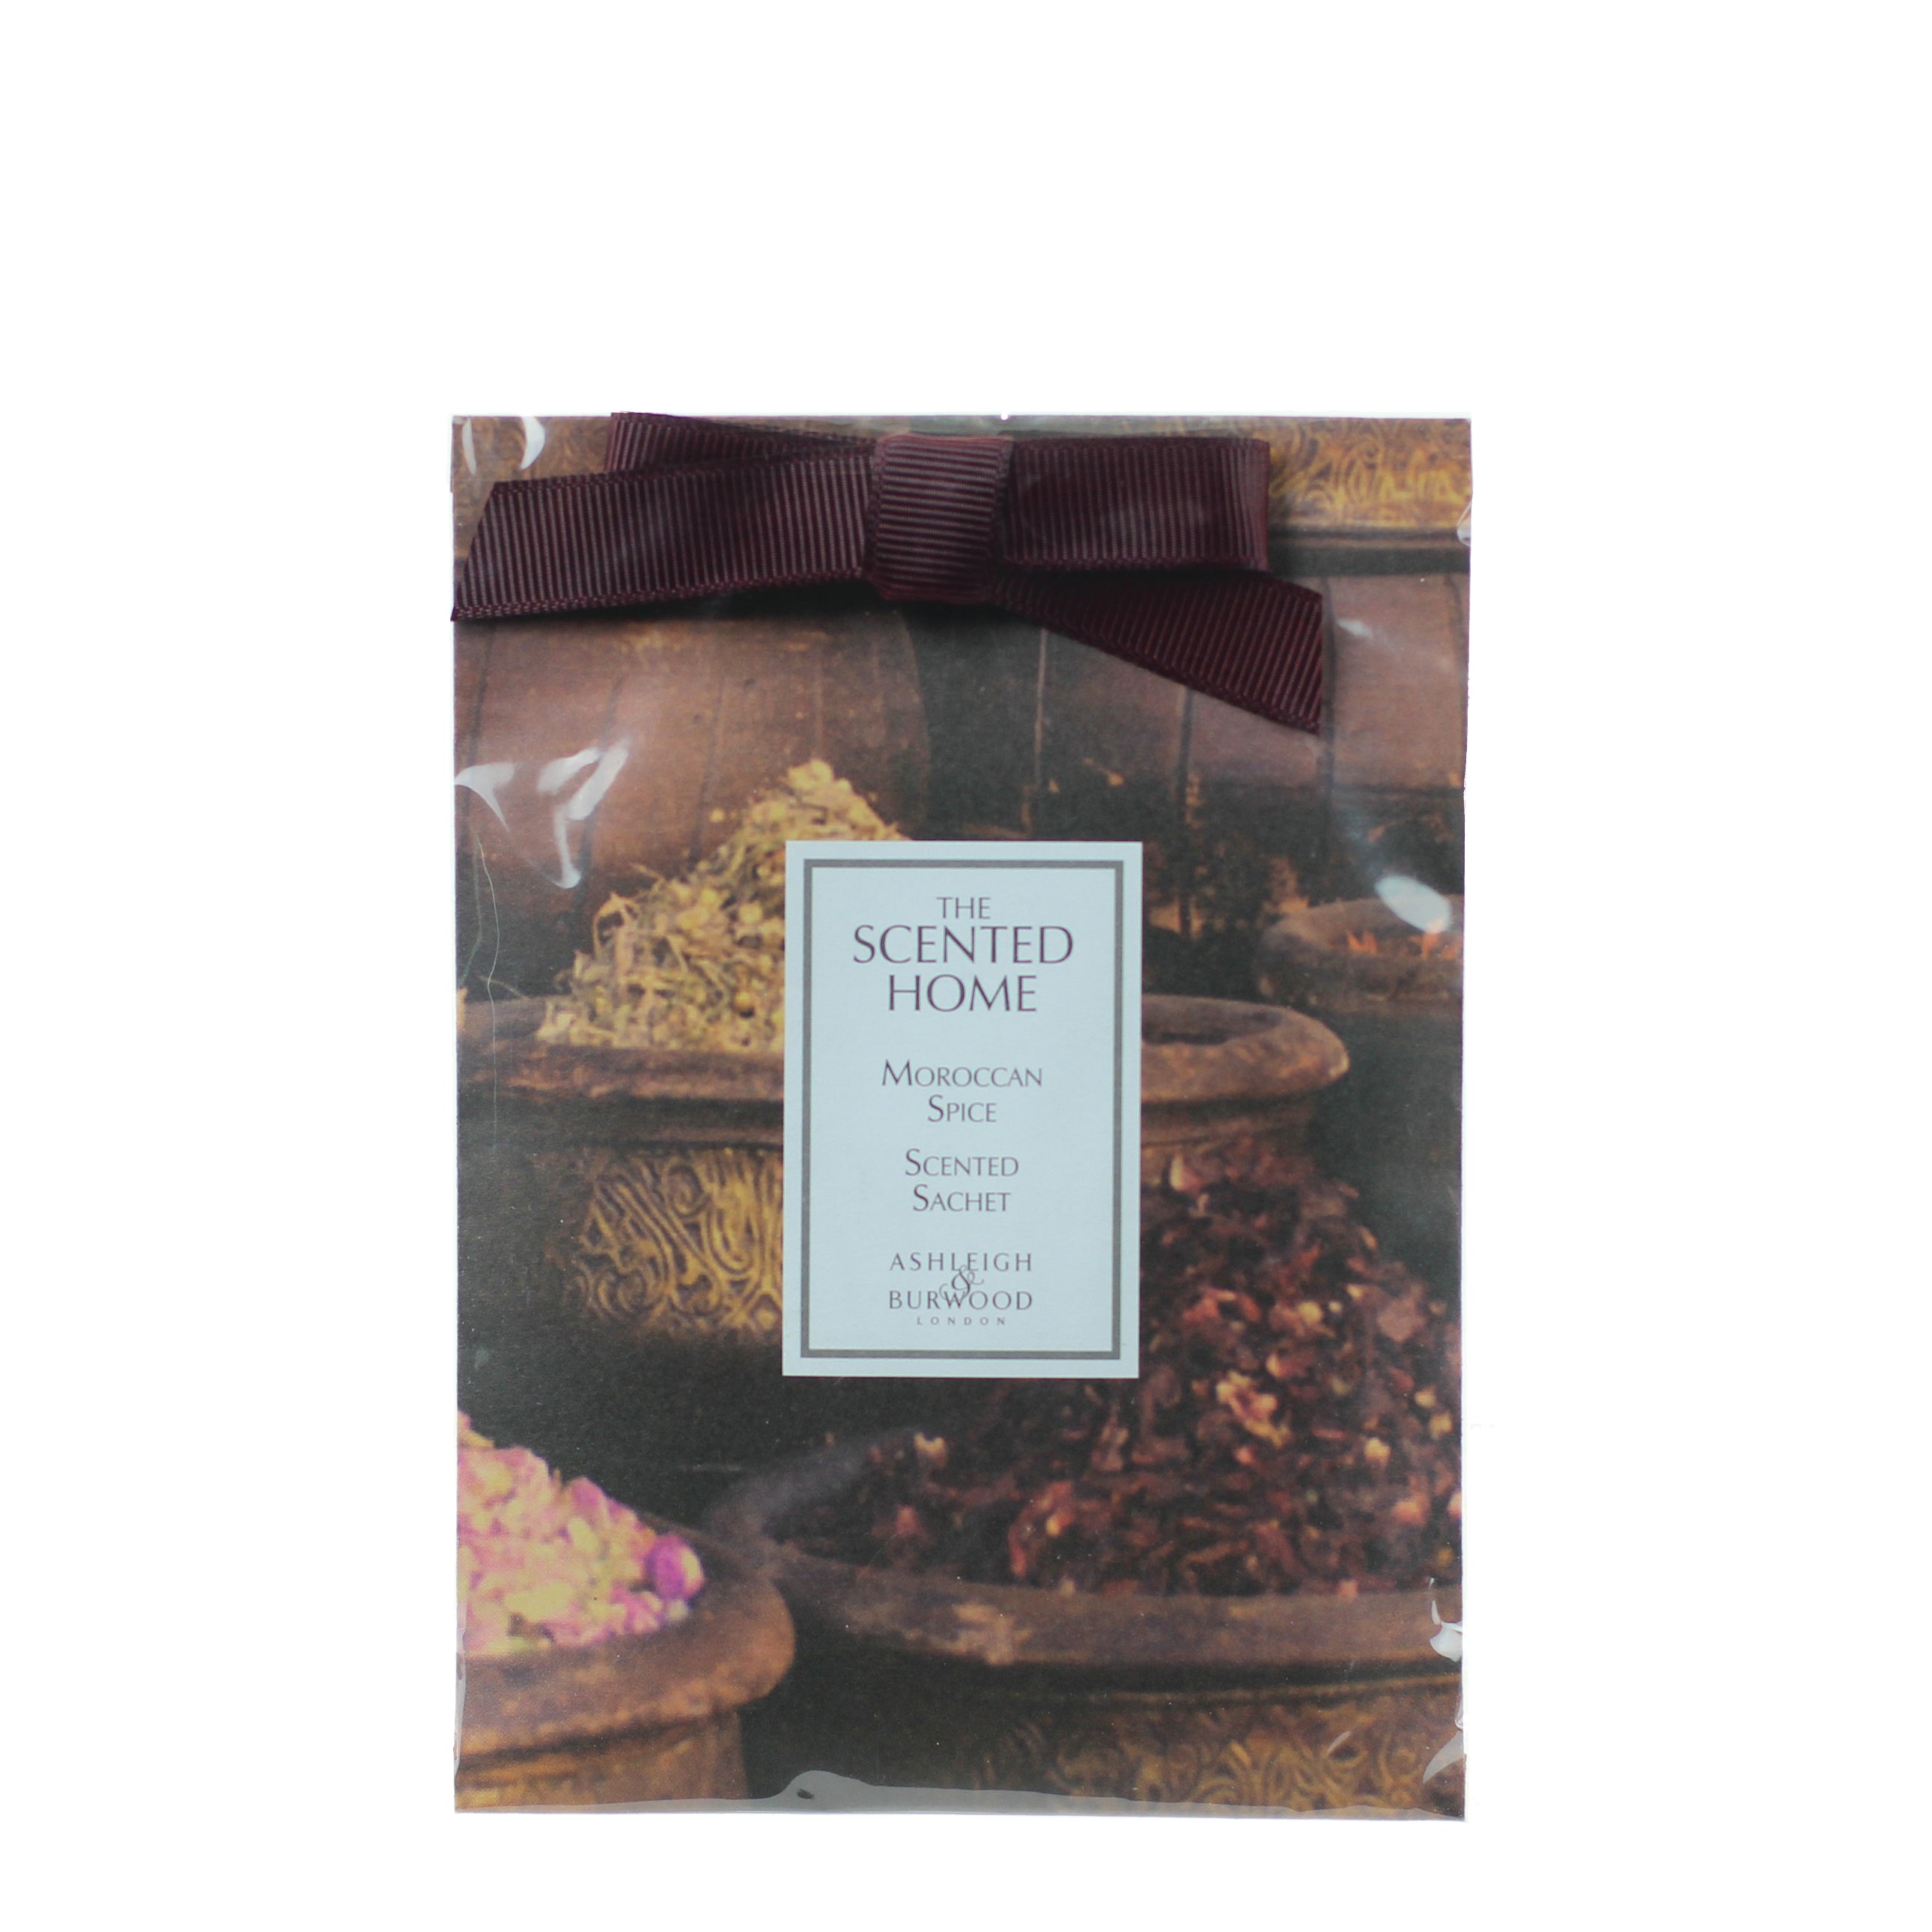 SCENTED SACHET 20G MOROCCAN SPICE - SCENTED HOME